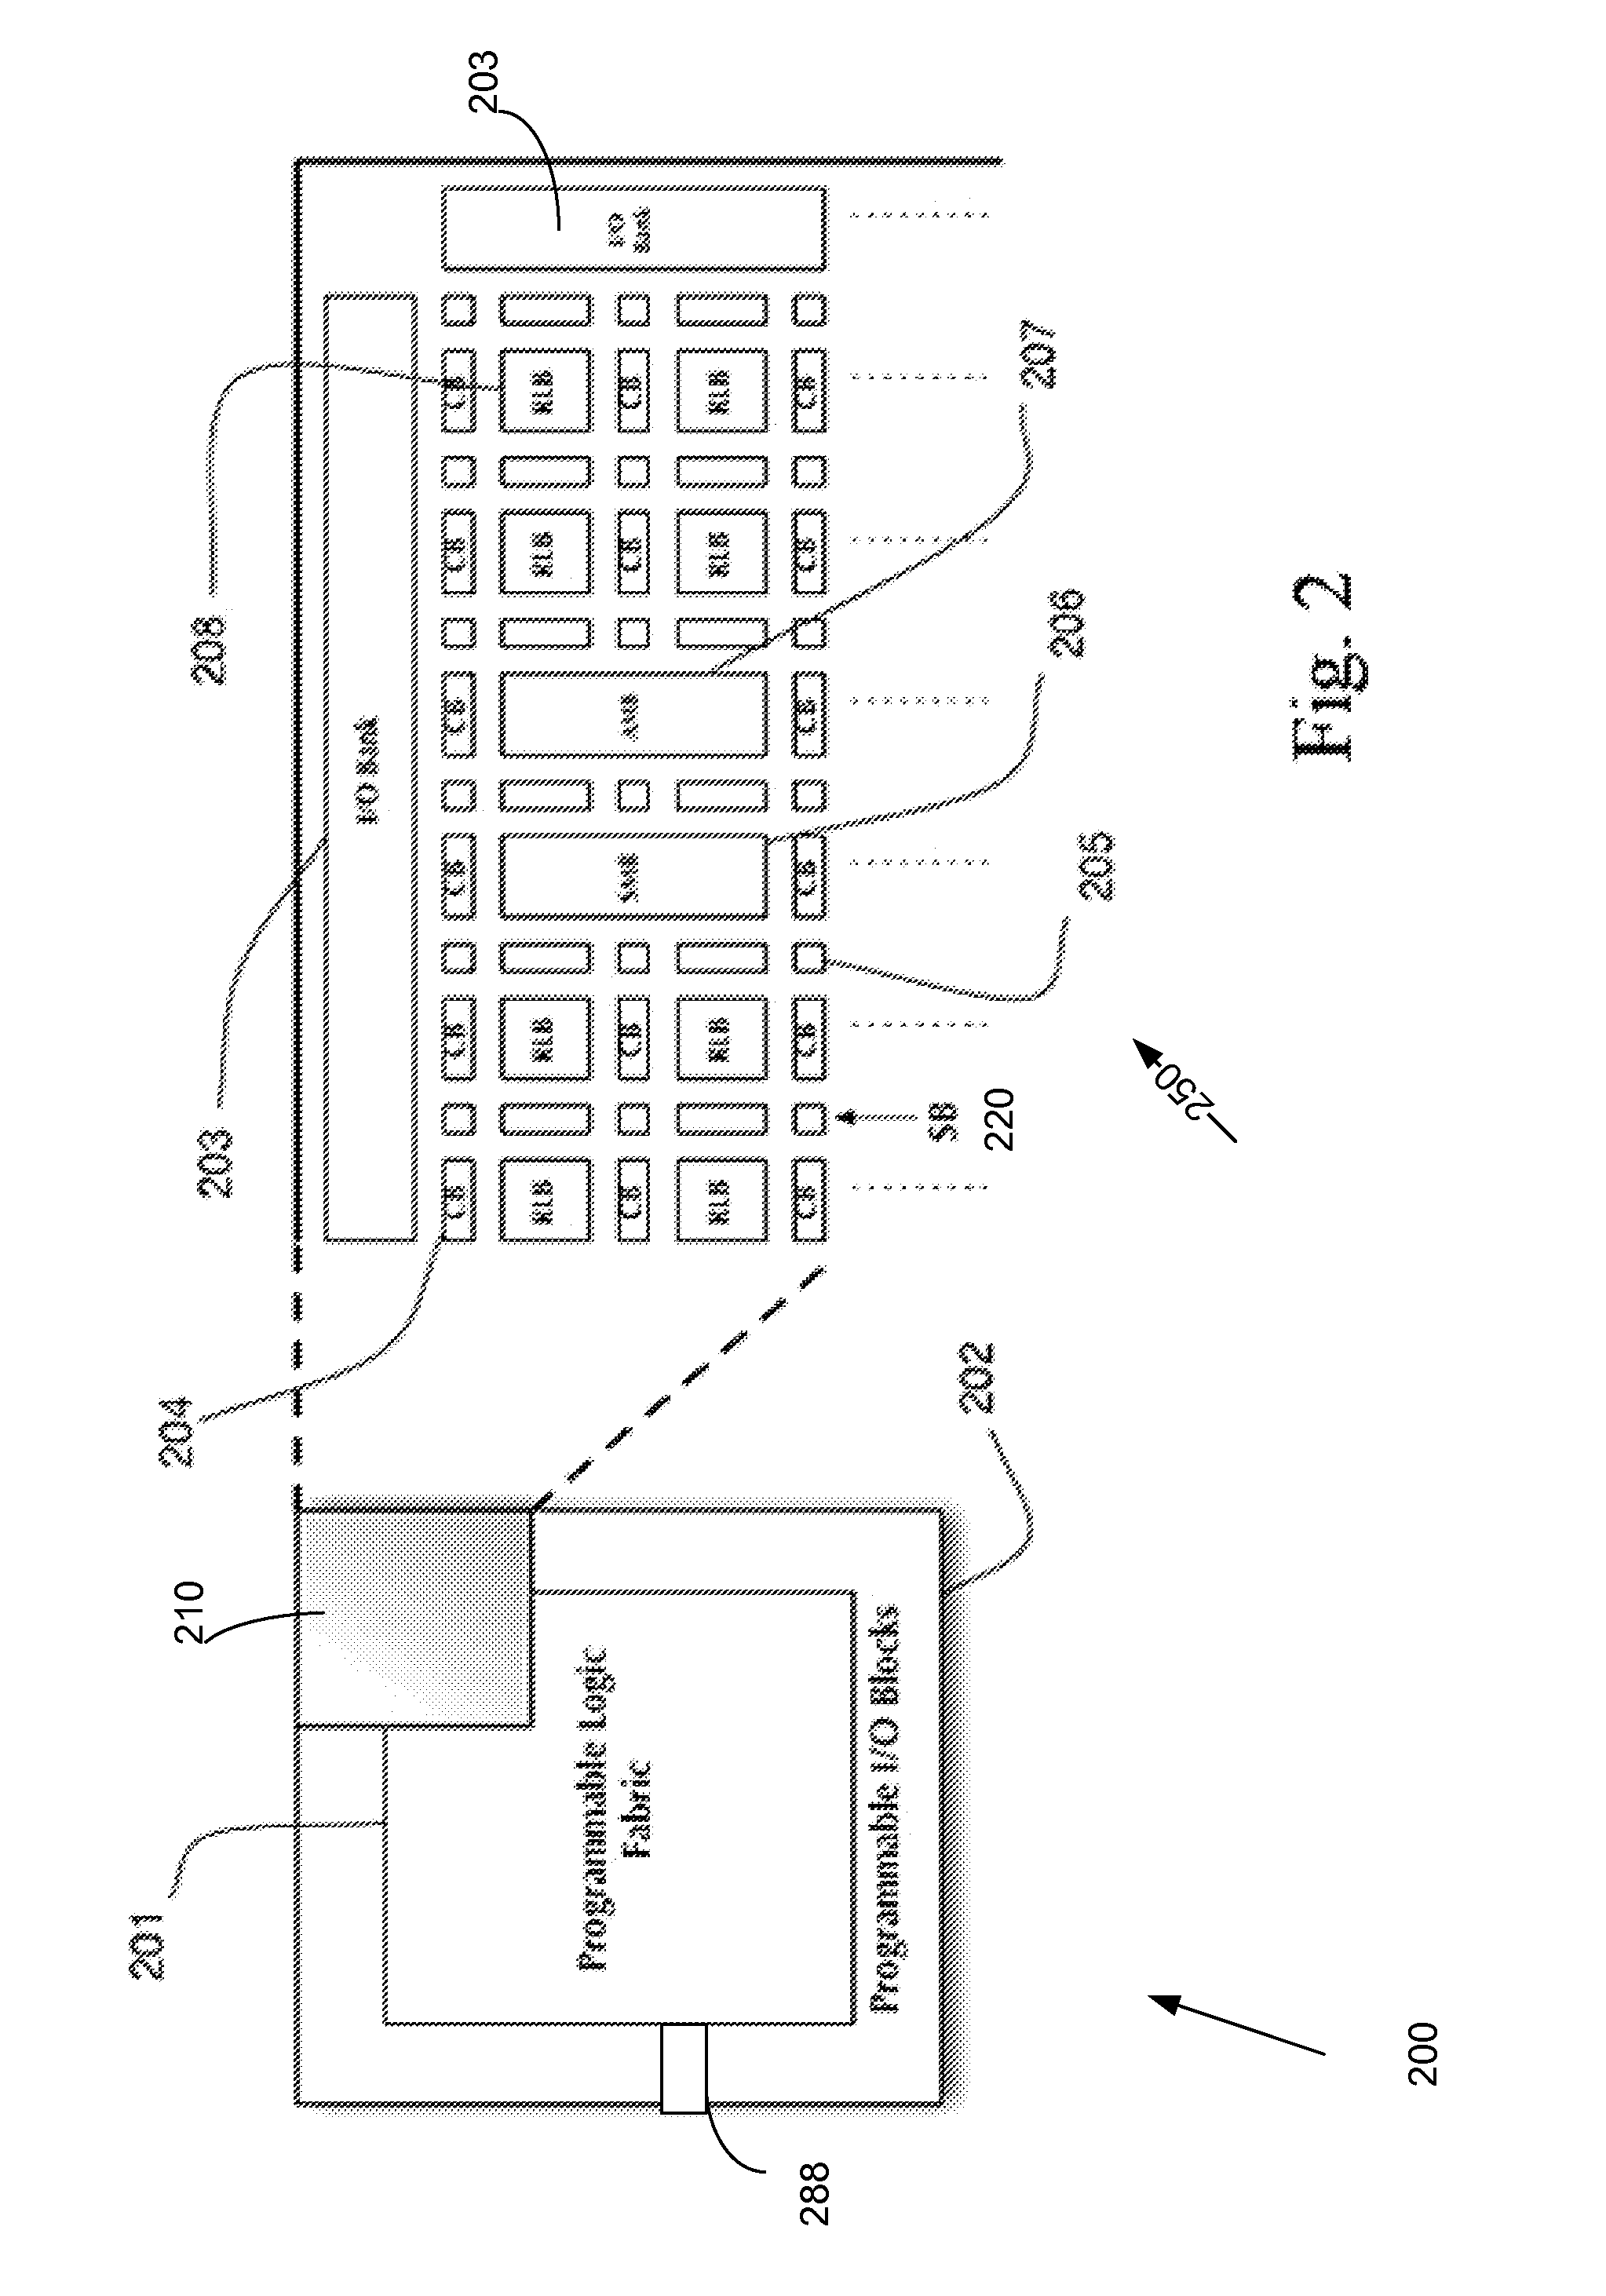 Reconfigurable logic fabrics for integrated circuits and systems and methods for configuring reconfigurable logic fabrics